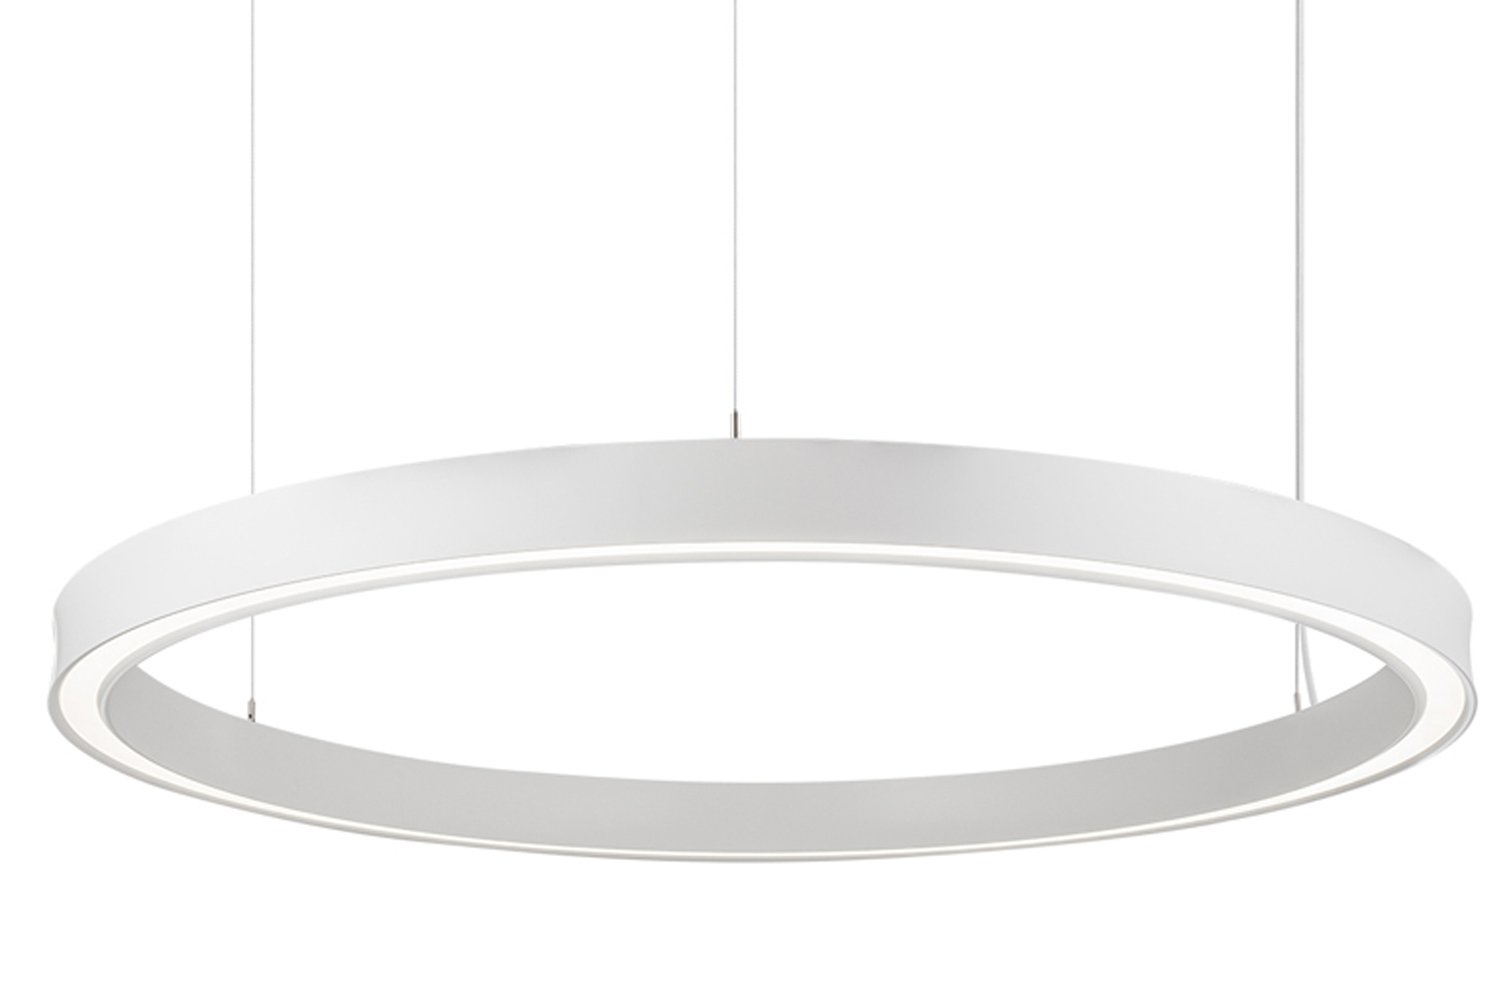 Impact Architectural Lighting launched the Hulaor ulapendant 